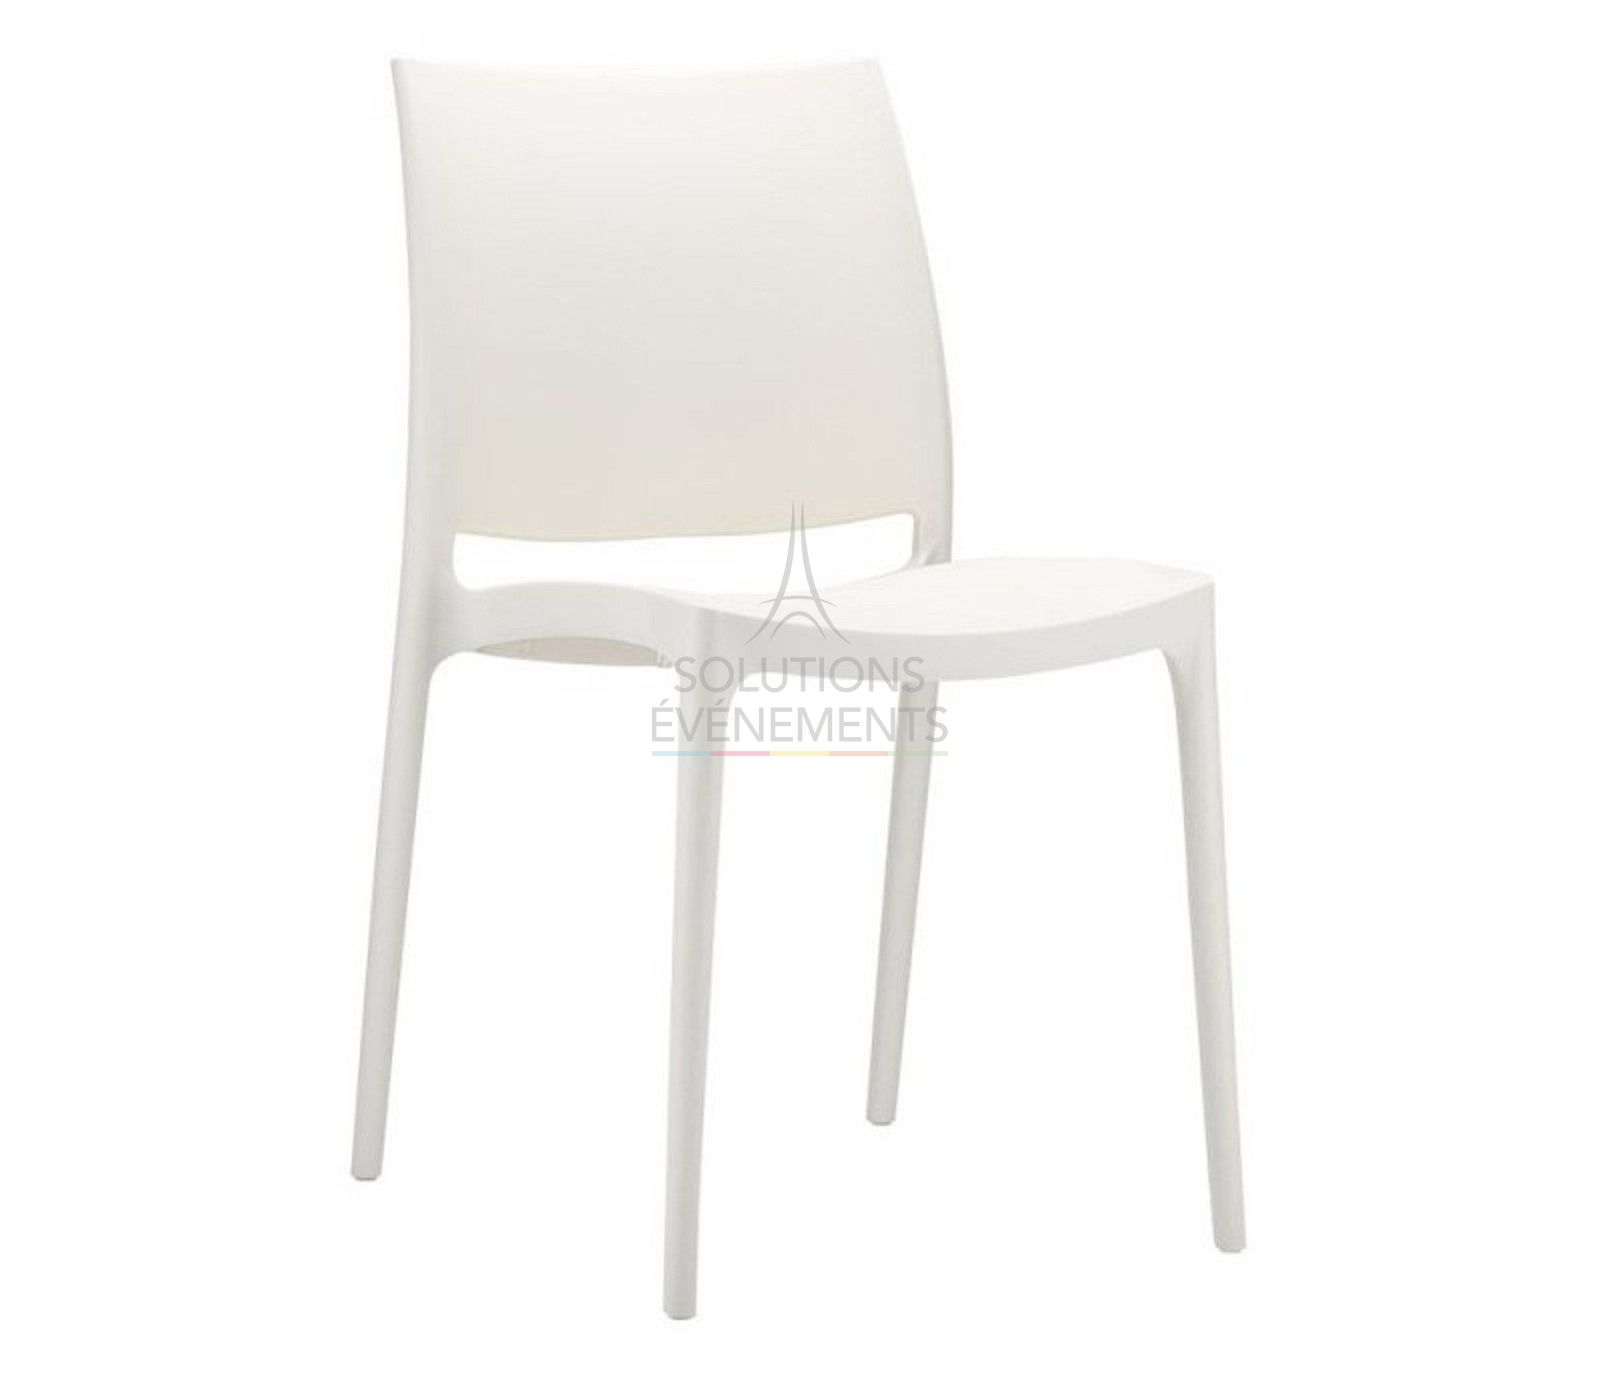 White chair rental for reception and seminar